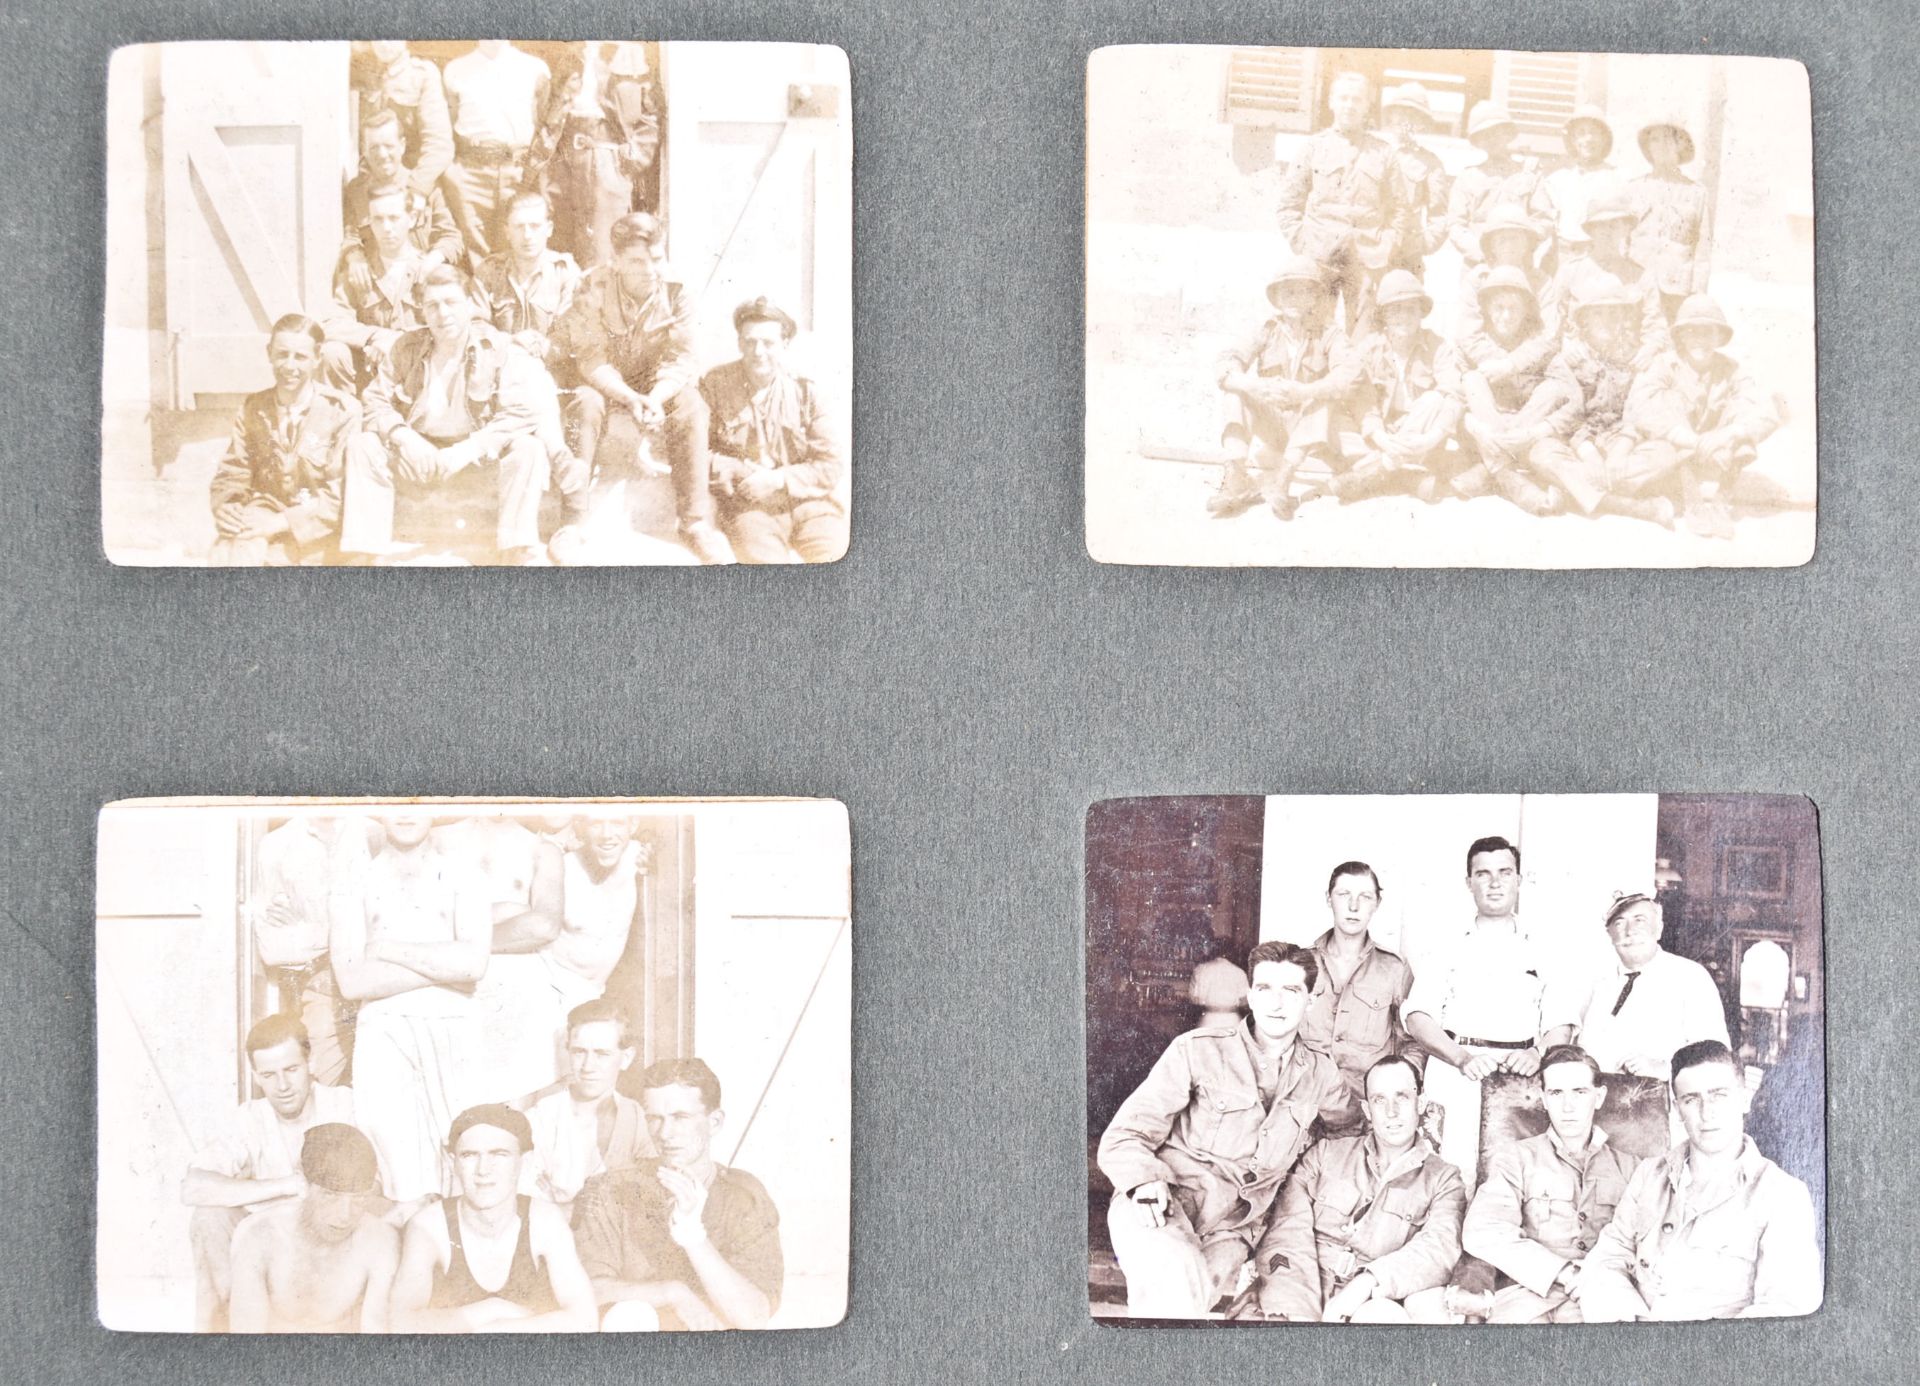 INCREDIBLE WWI MIDDLE EAST PERSONAL PHOTOGRAPH ALBUM